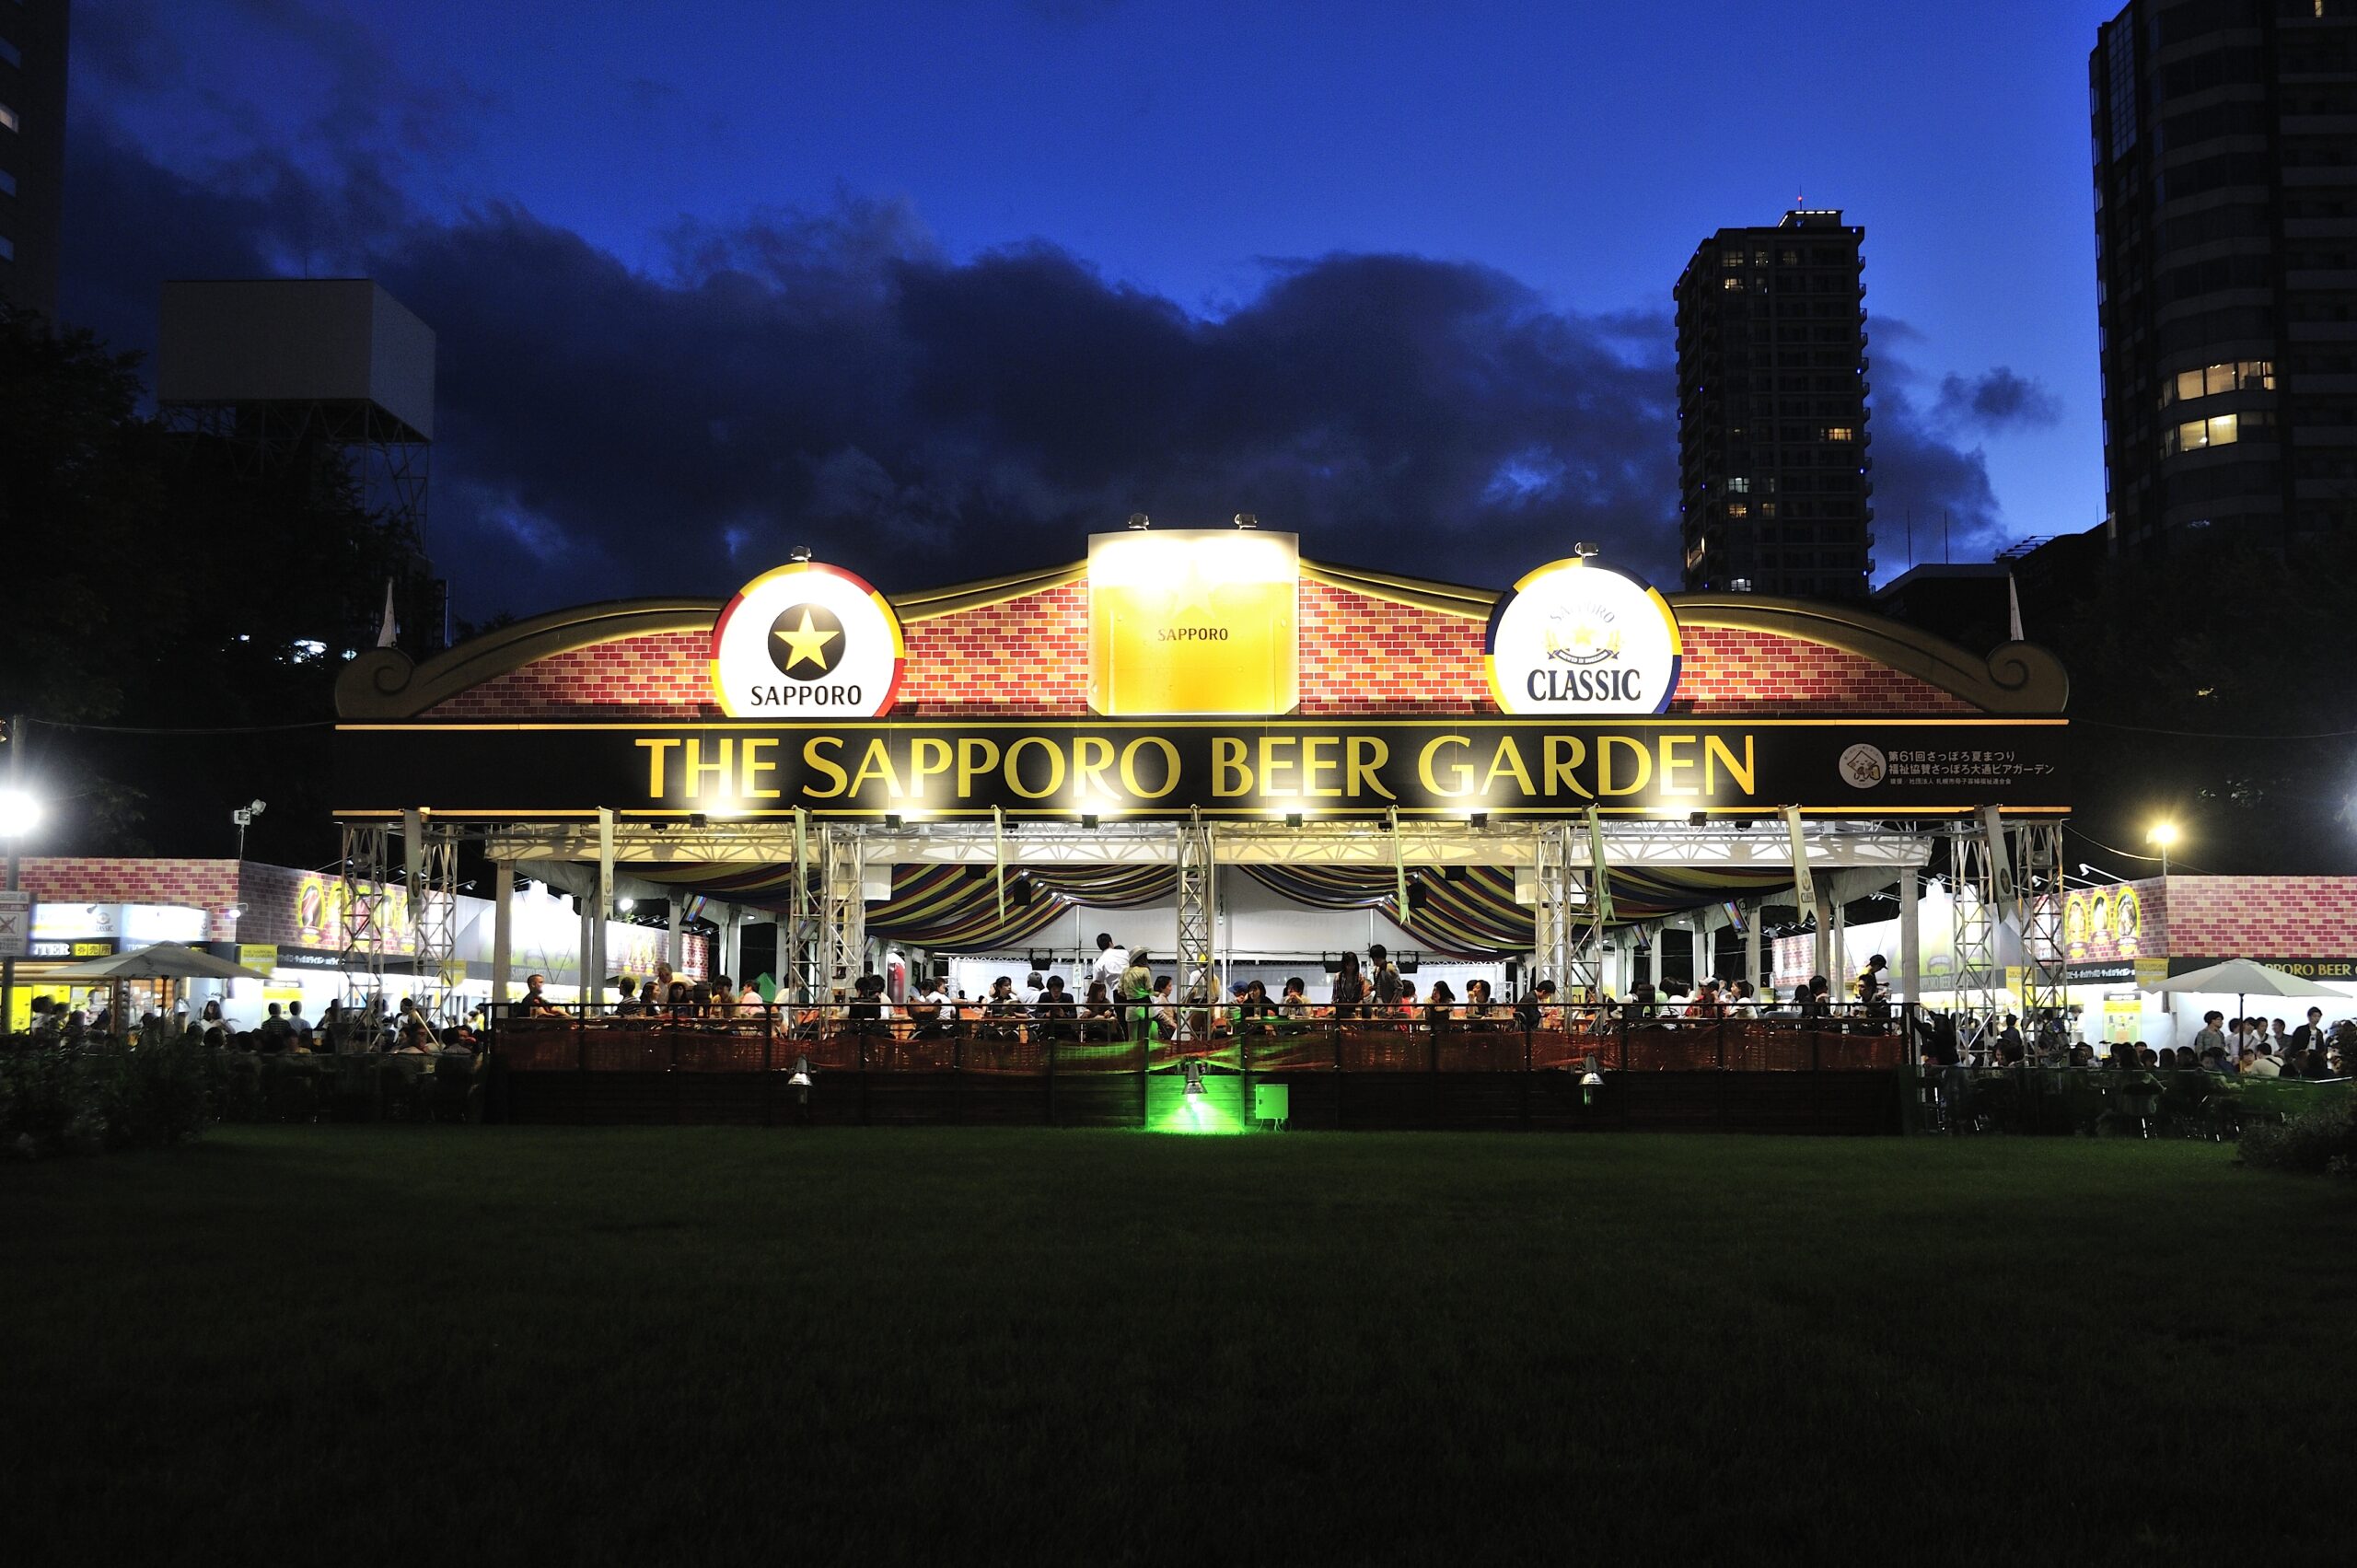 The Sapporo Beer Garden is held in Sapporo's Odori Park every summer.